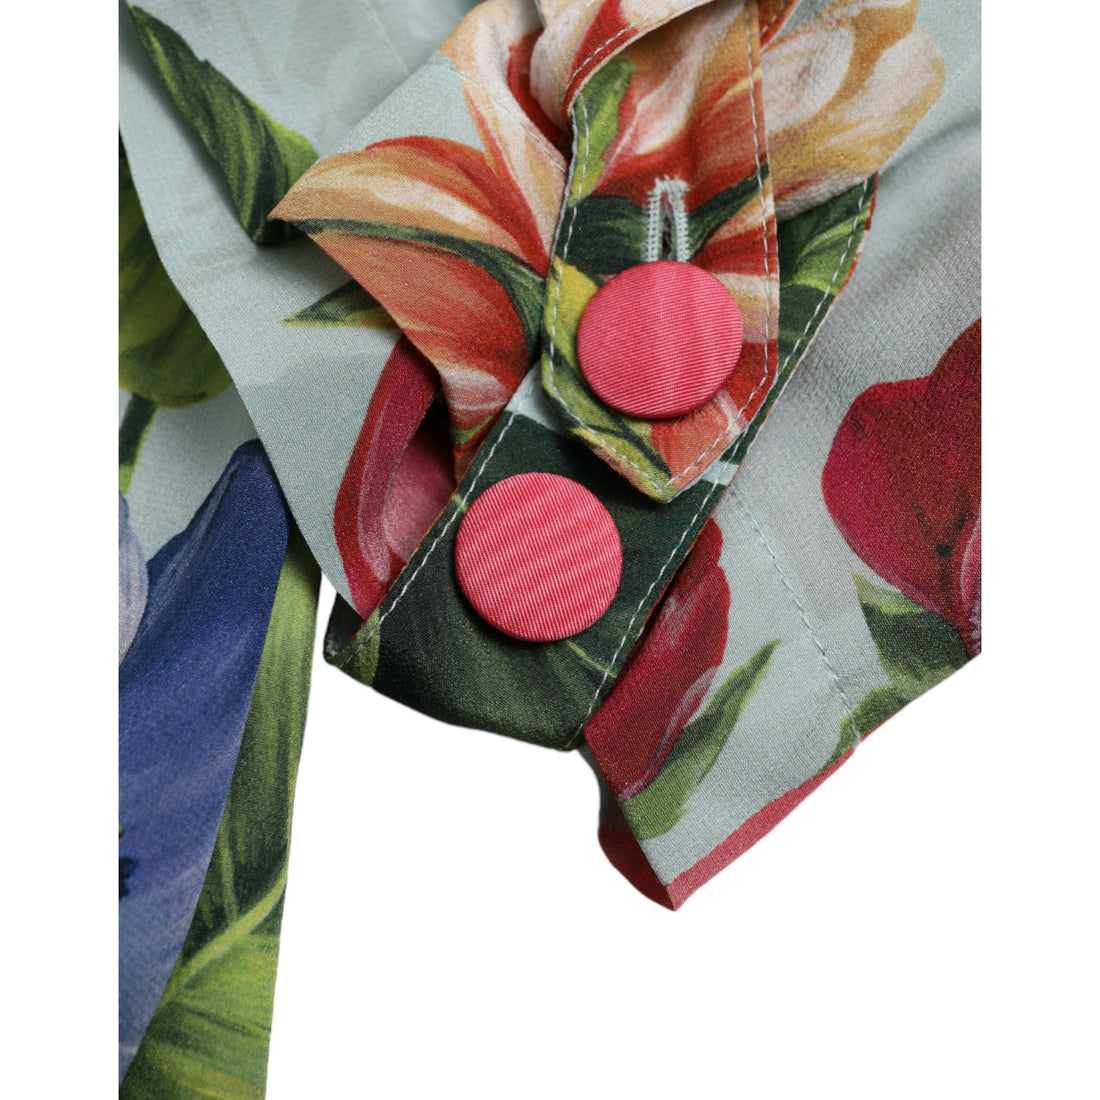 Dolce & Gabbana Multicolor Floral Silk Trench Coat Jacket